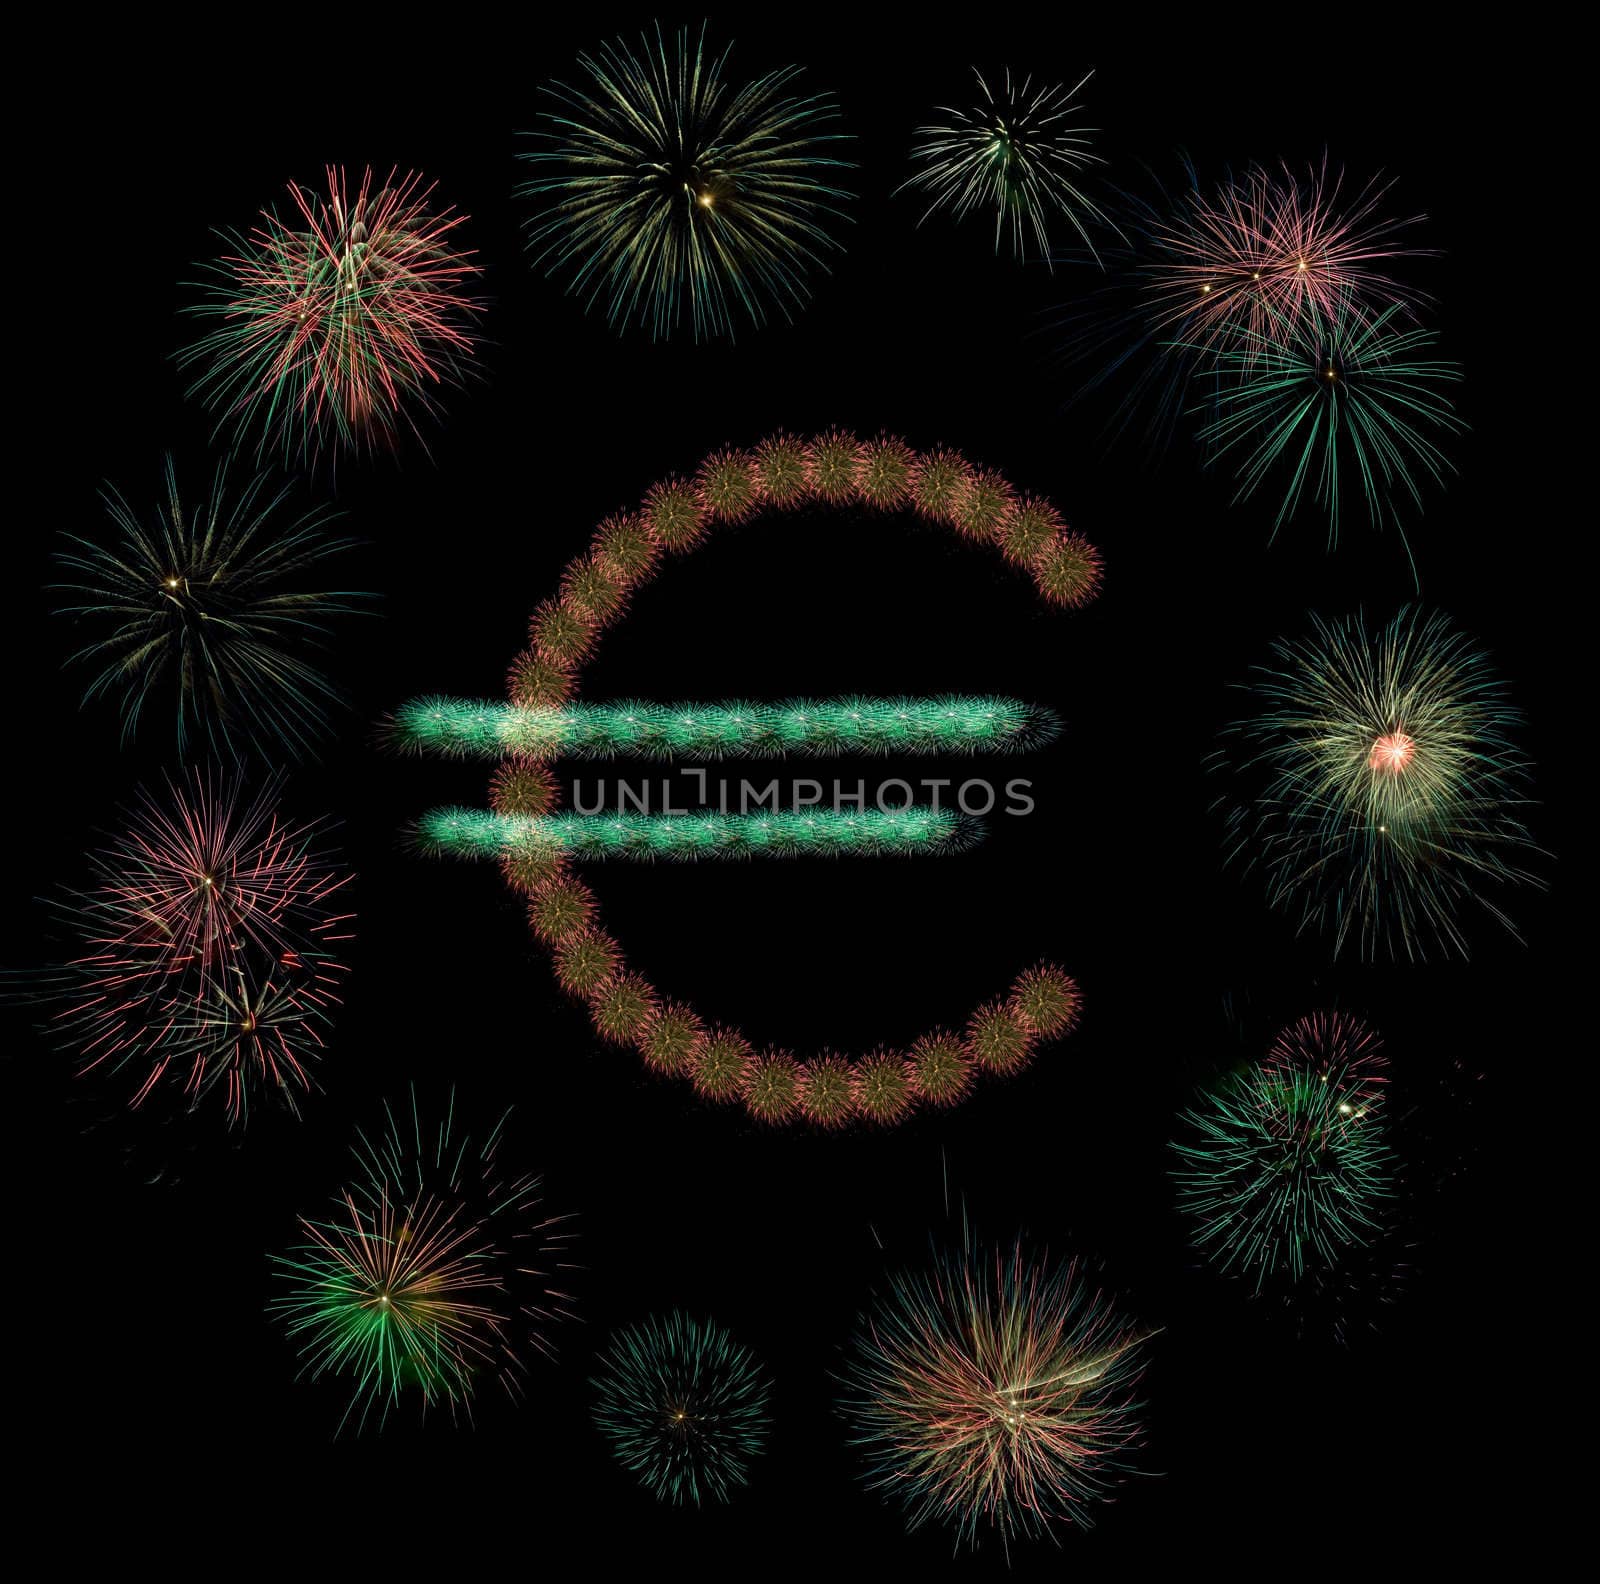 Euro sign inside a circle made of fireworks shots on black background.